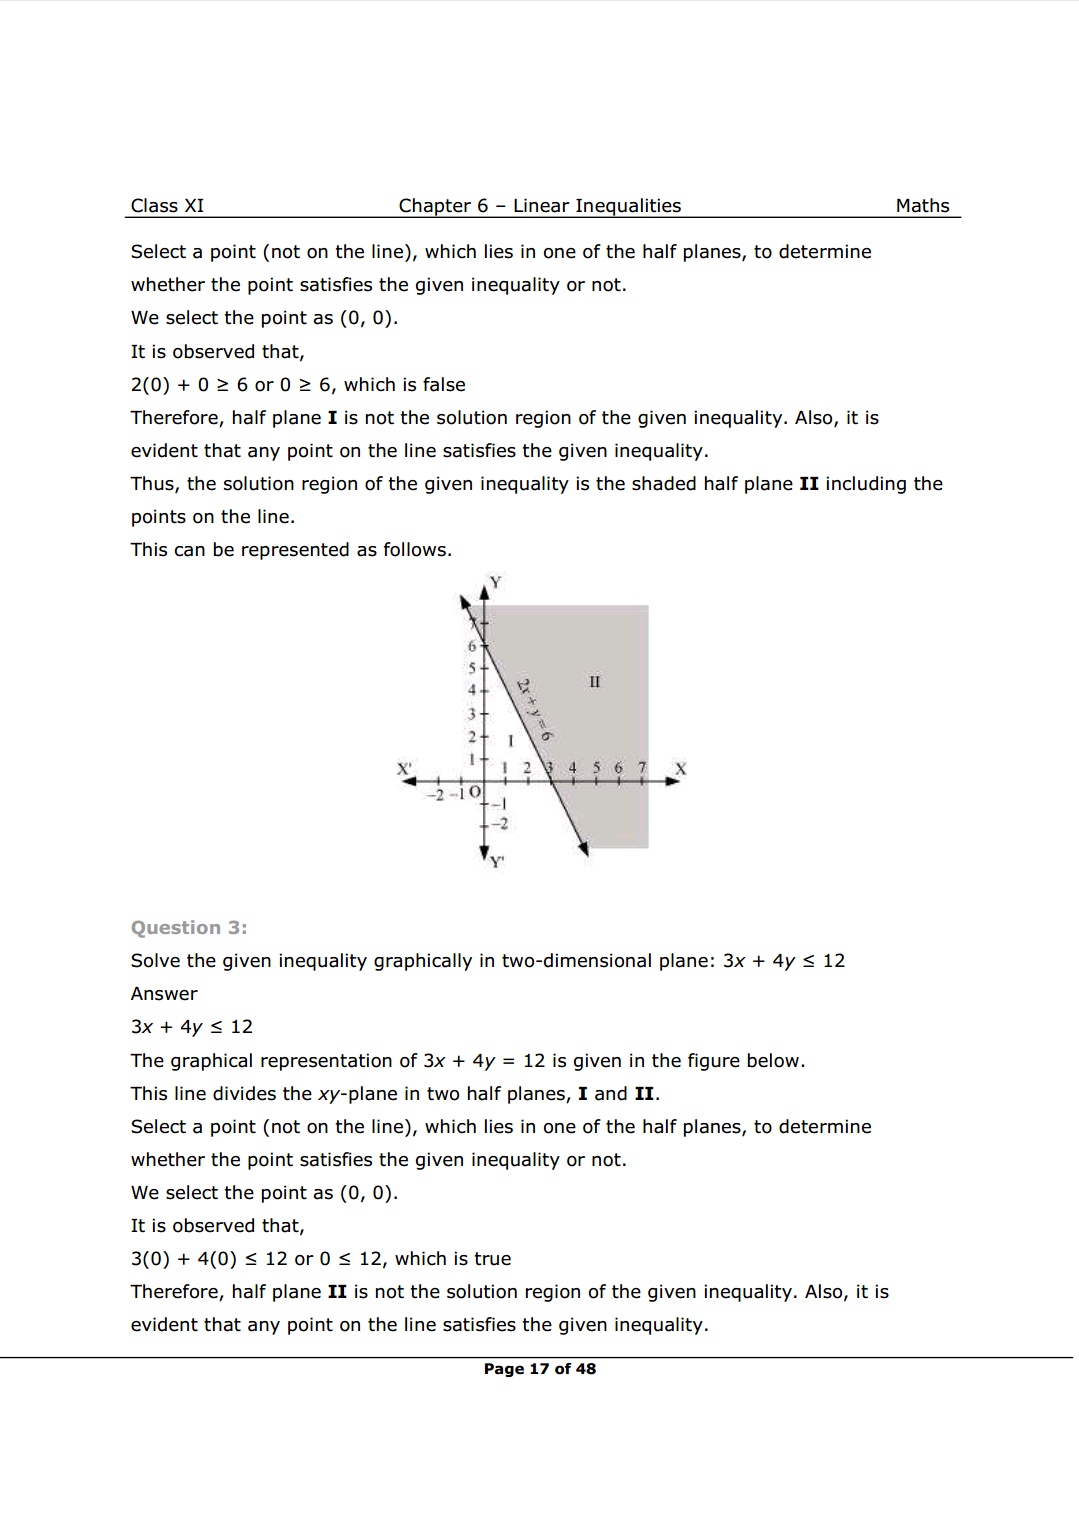 Class 11 Maths Chapter 6 Exercise 6.2 Solutions Image 2